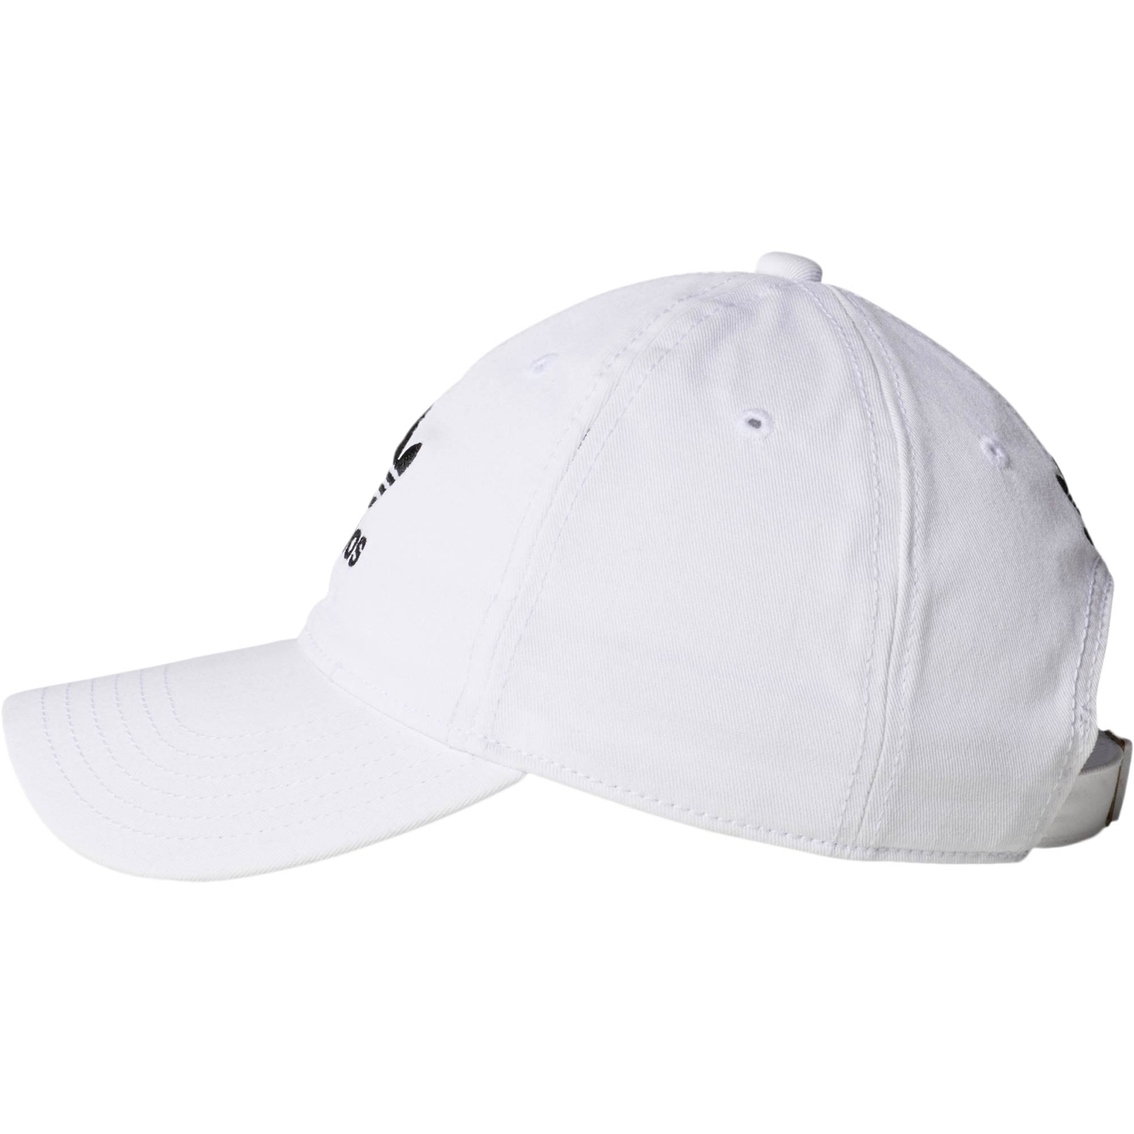 Adidas Originals Relaxed Strap Back Hat - Image 3 of 7